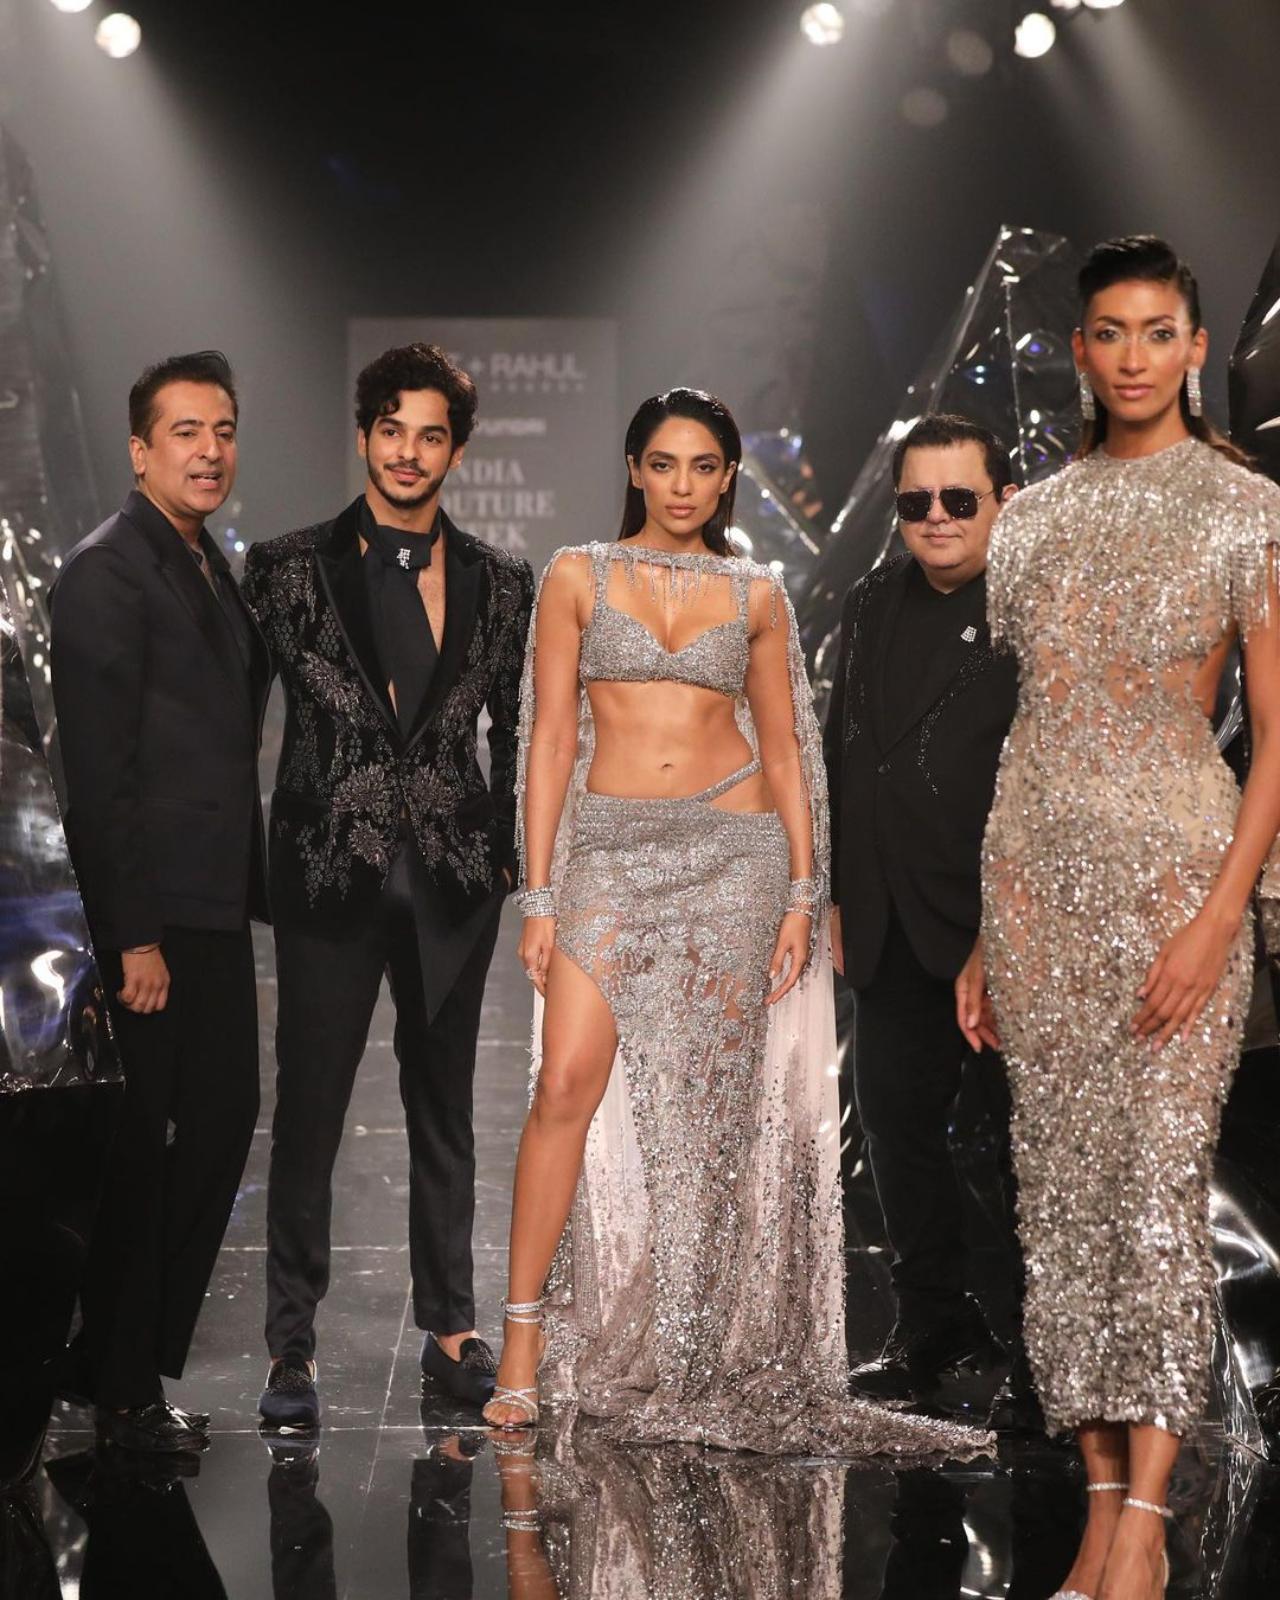 Rohit Gandhi and Rahul Khanna presented their enchanting collection, Equinox at India Couture Week 2023. The inspiration behind the collection was drawn from the geometrical aesthetics of the equinox and of changing seasons. The collection was also rooted in the dreamy and alluring aesthetics of wintry walks, where trellis designs adorning ancient metal fences become symbols of hope